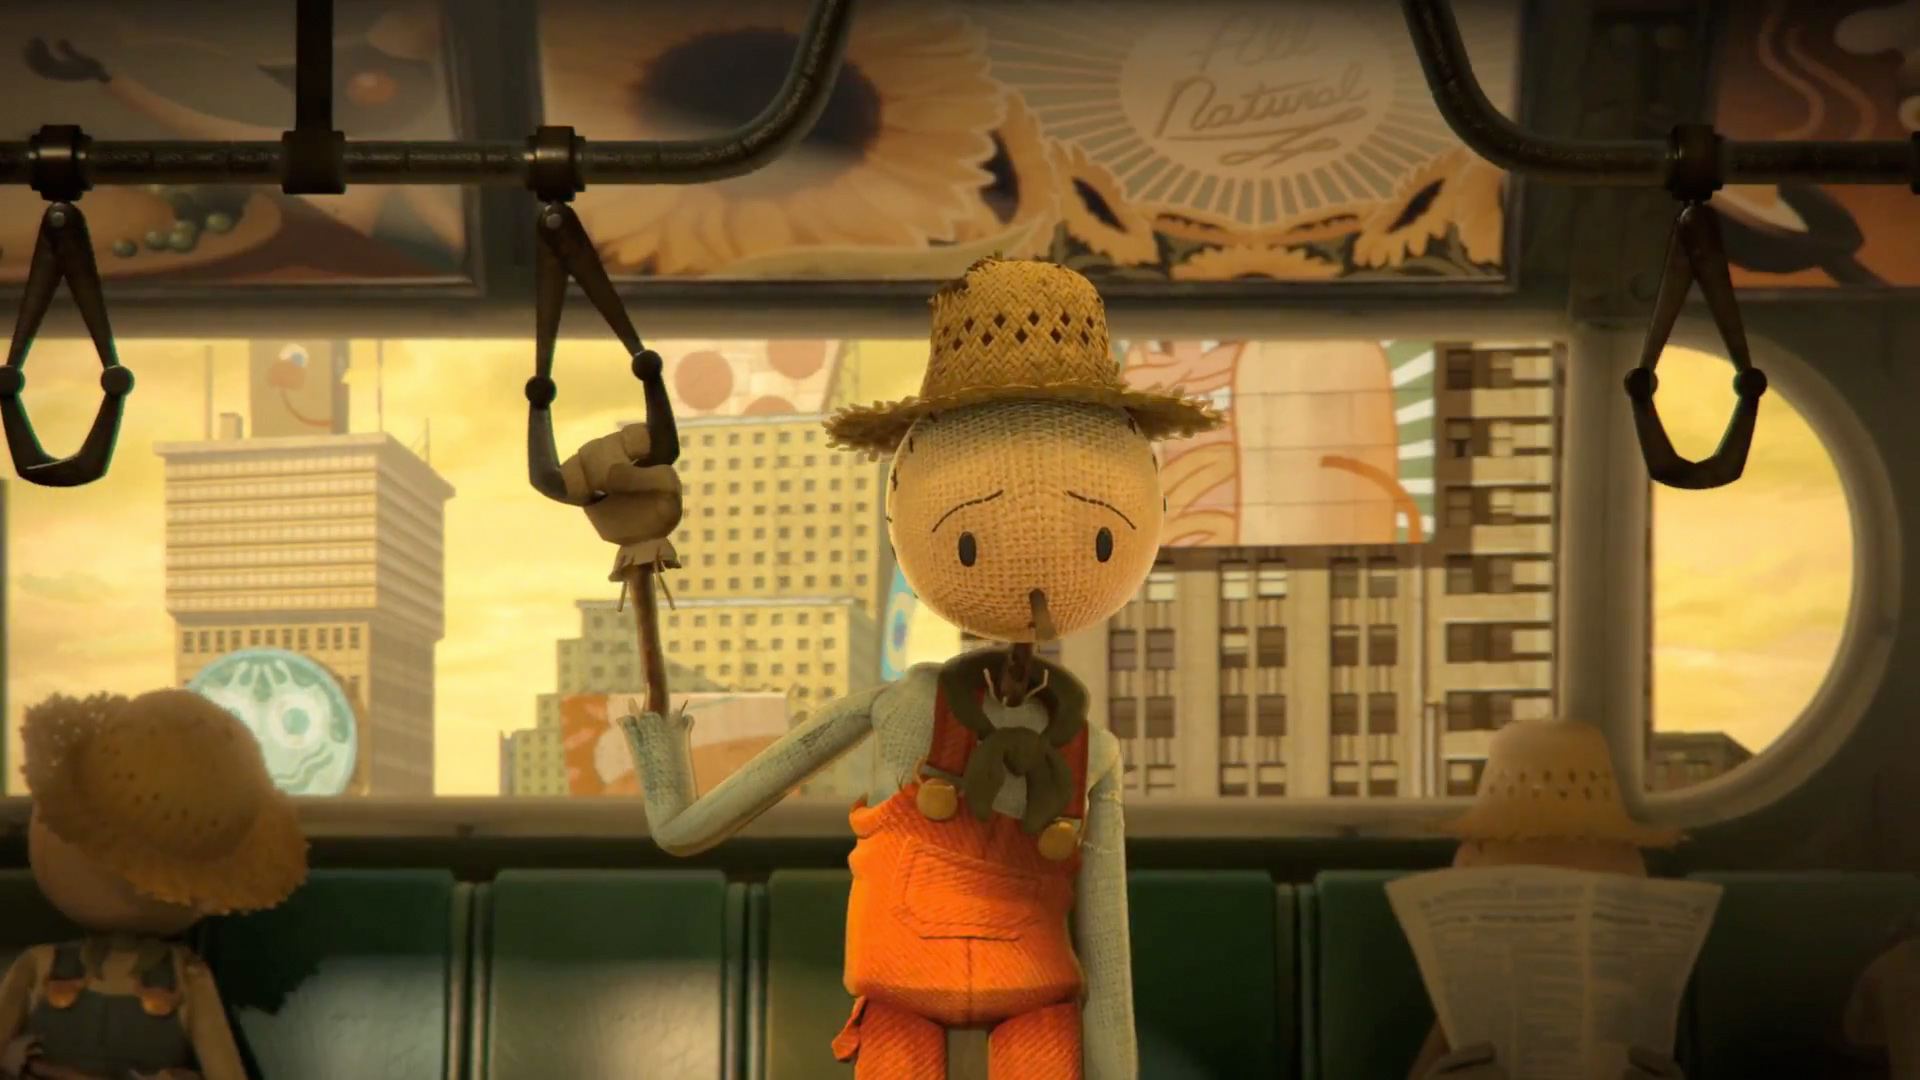 chipotle-creates-great-animated-short-film-the-scarecrow-14.jpg